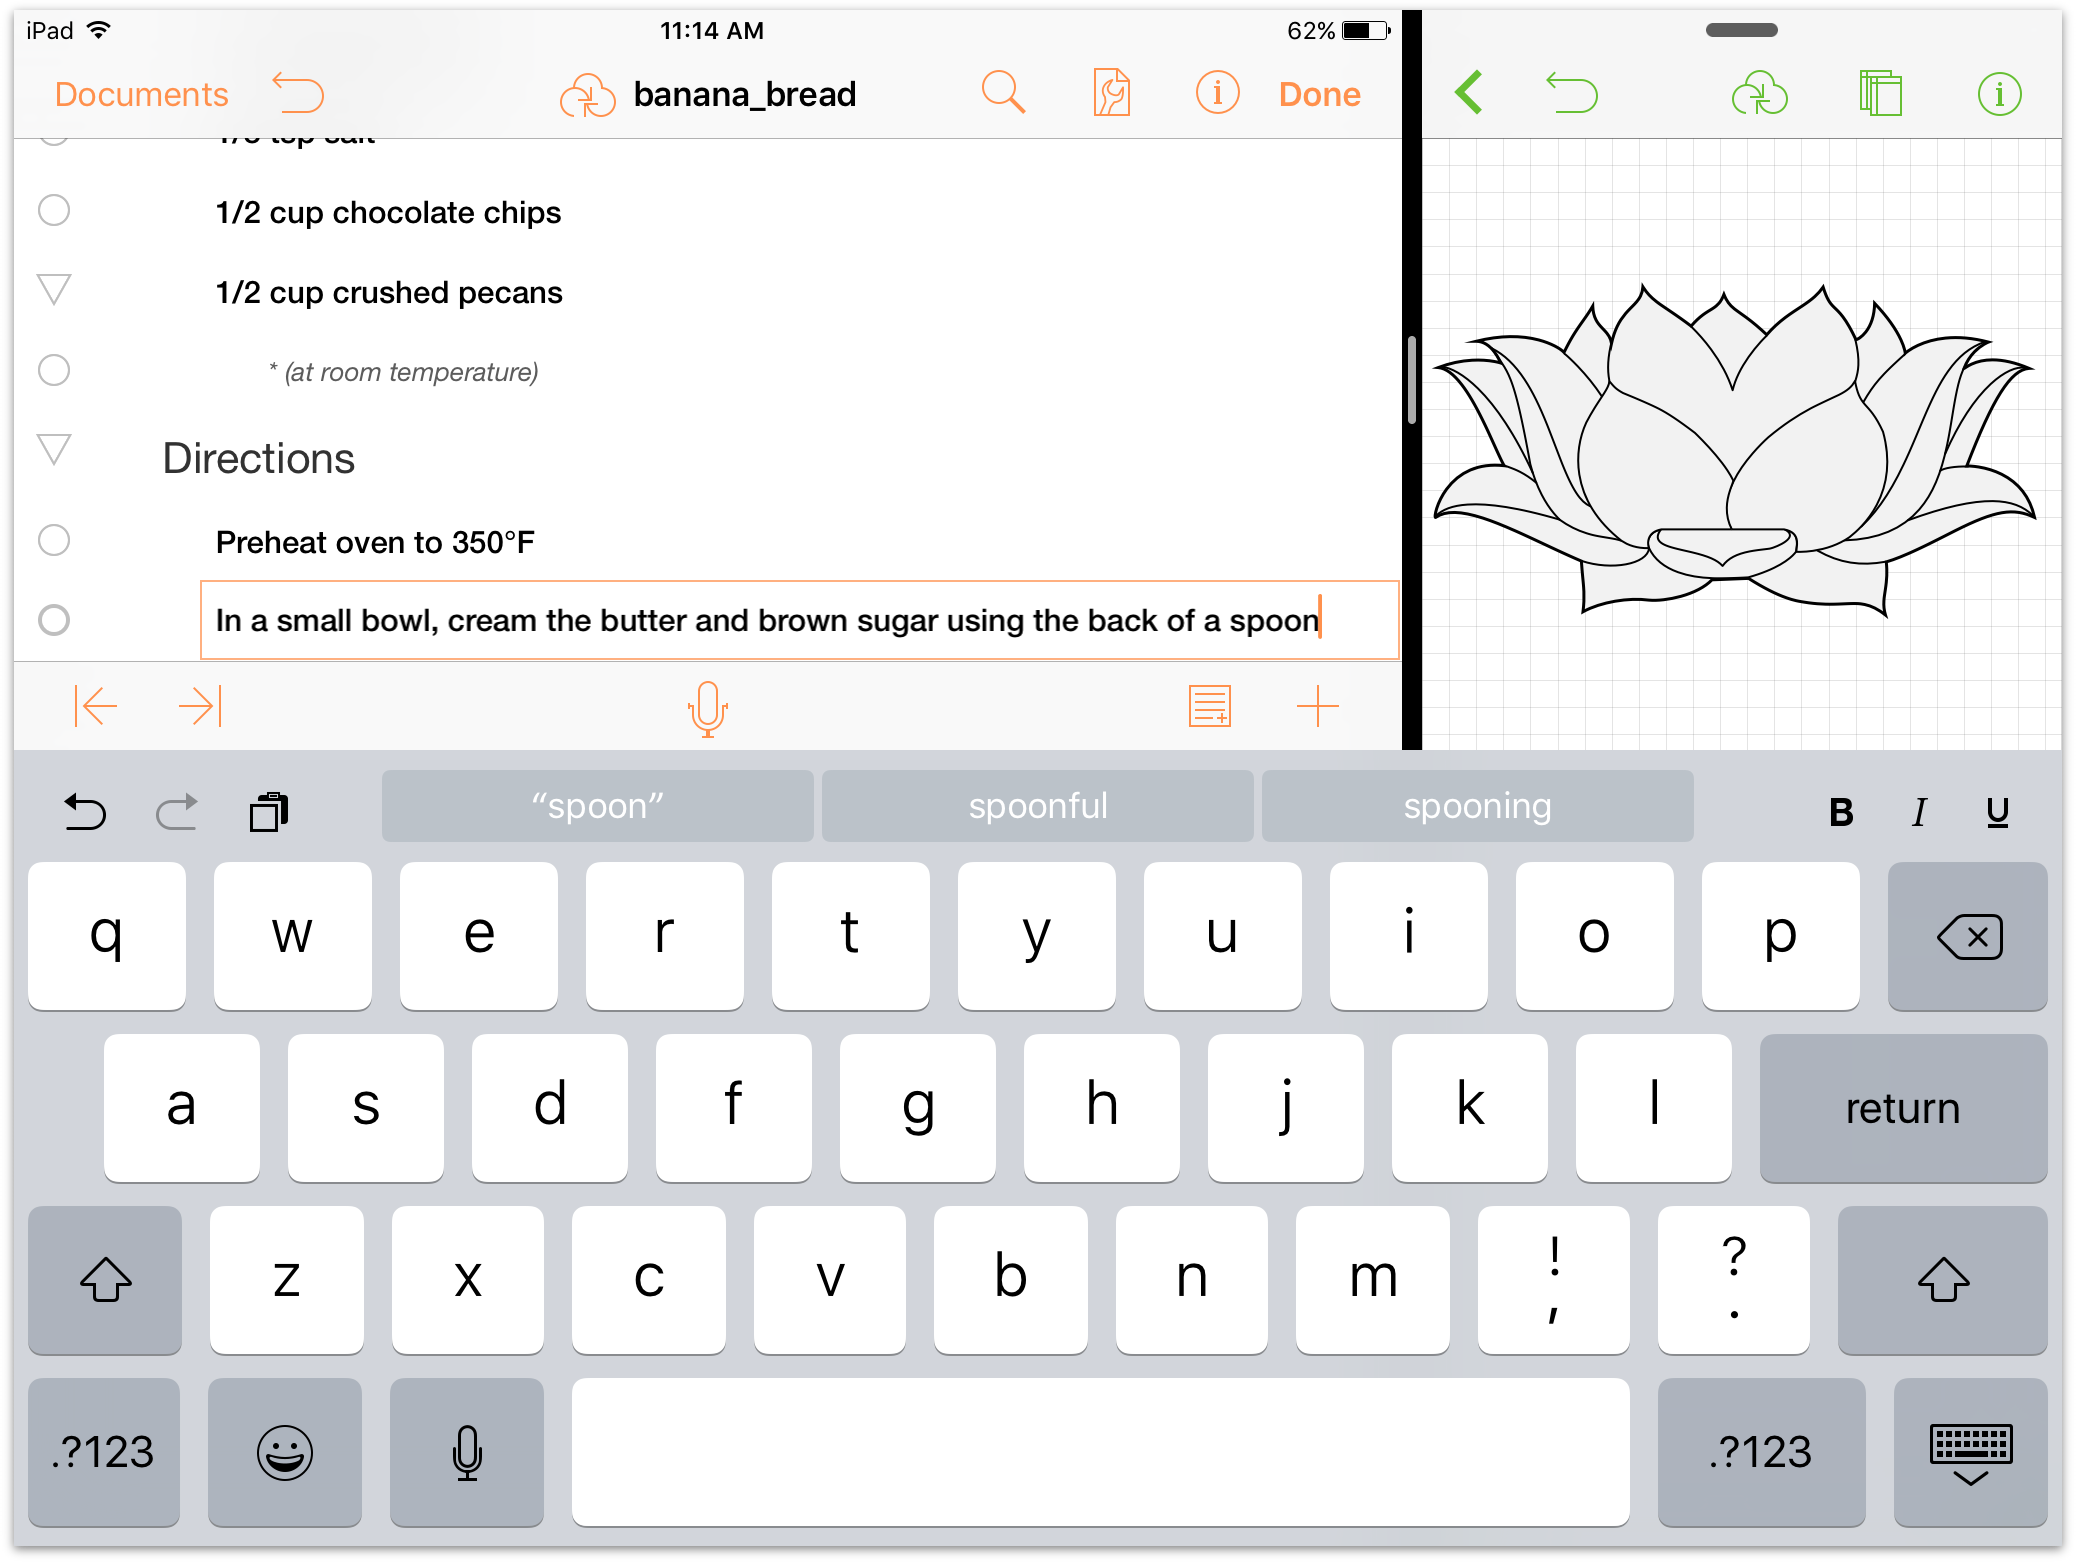 Multitasking in iOS 9, with OmniGraffle on the left and OmniOutliner on the right